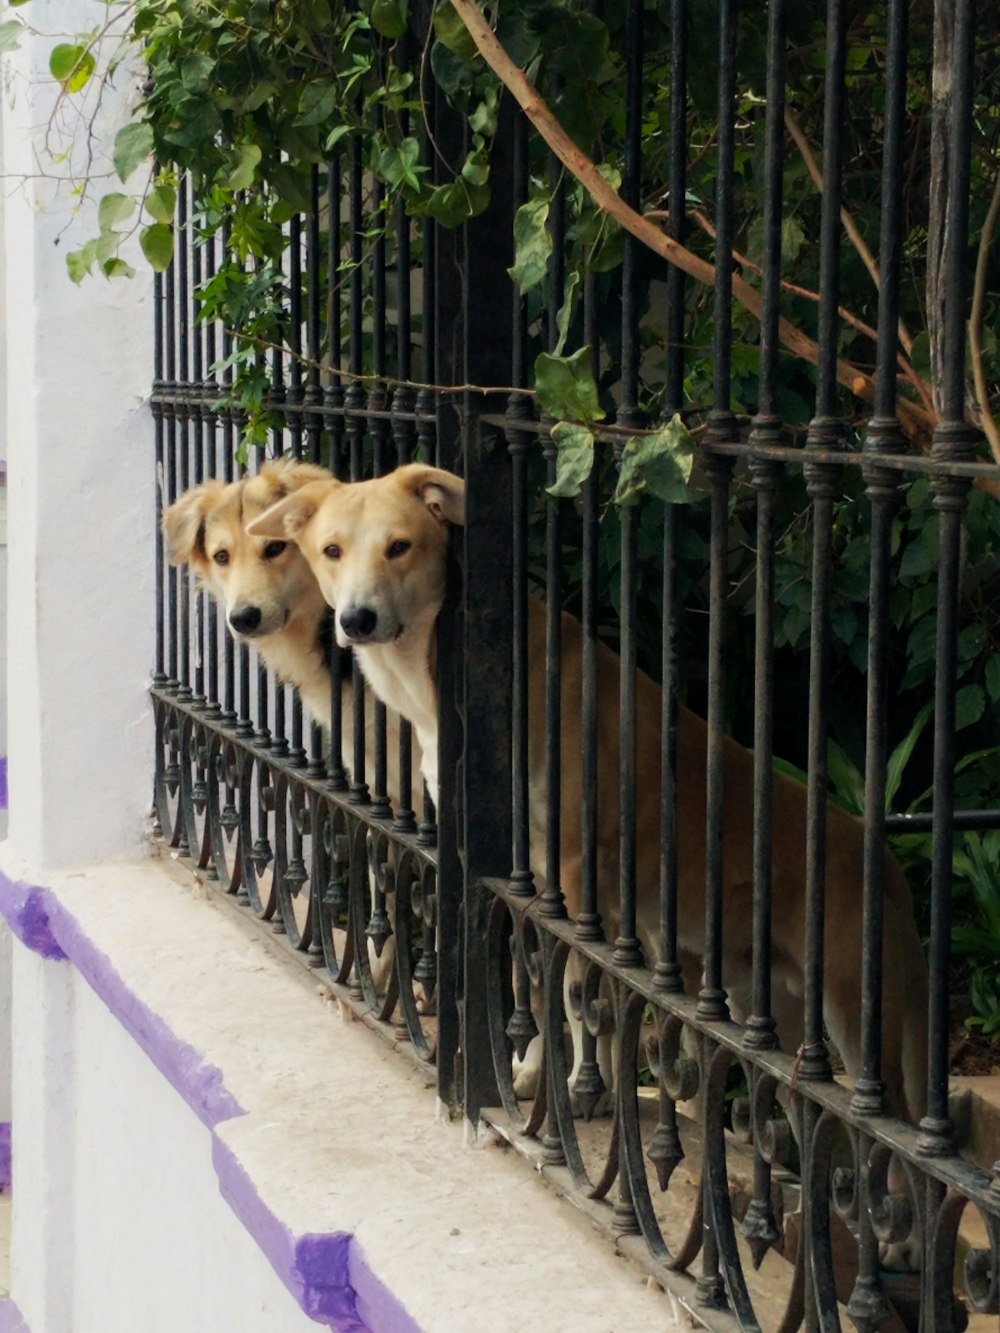 two dogs sticking their heads out on fence bars